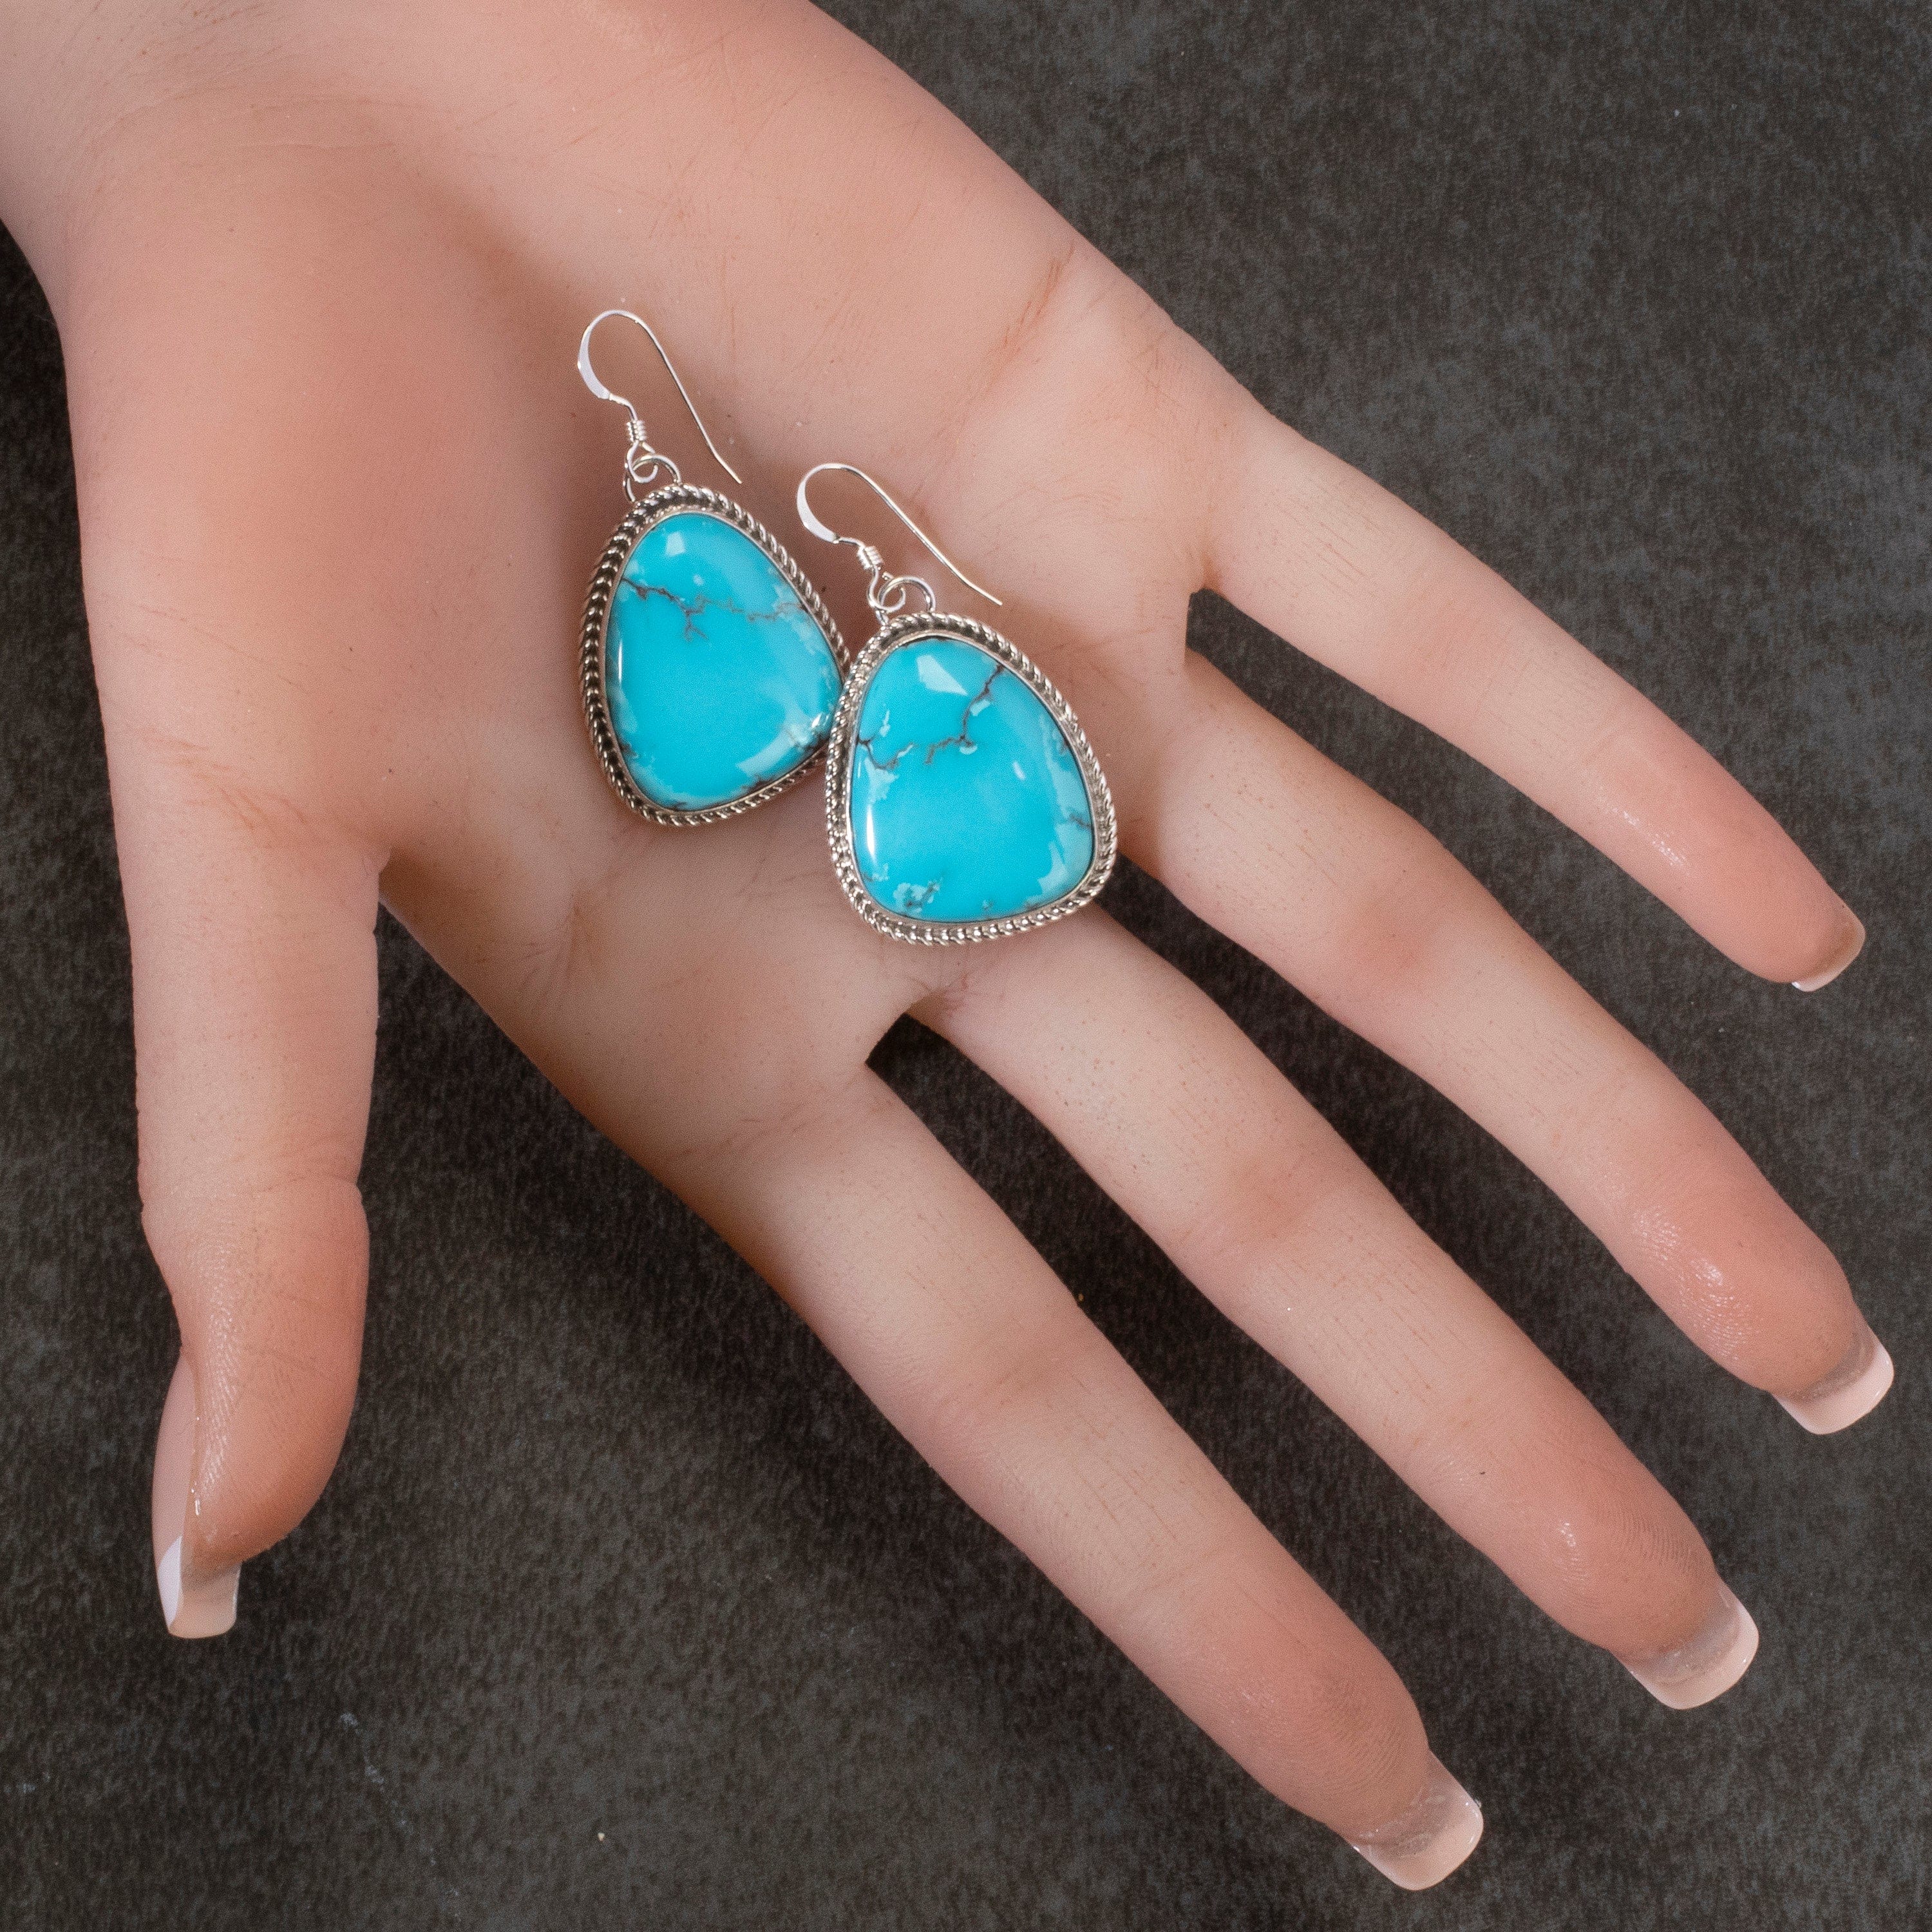 Kalifano Native American Jewelry Kingman Turquoise USA Native American Made 925 Sterling Silver Dangly Earrings with French Hook NAE600.013